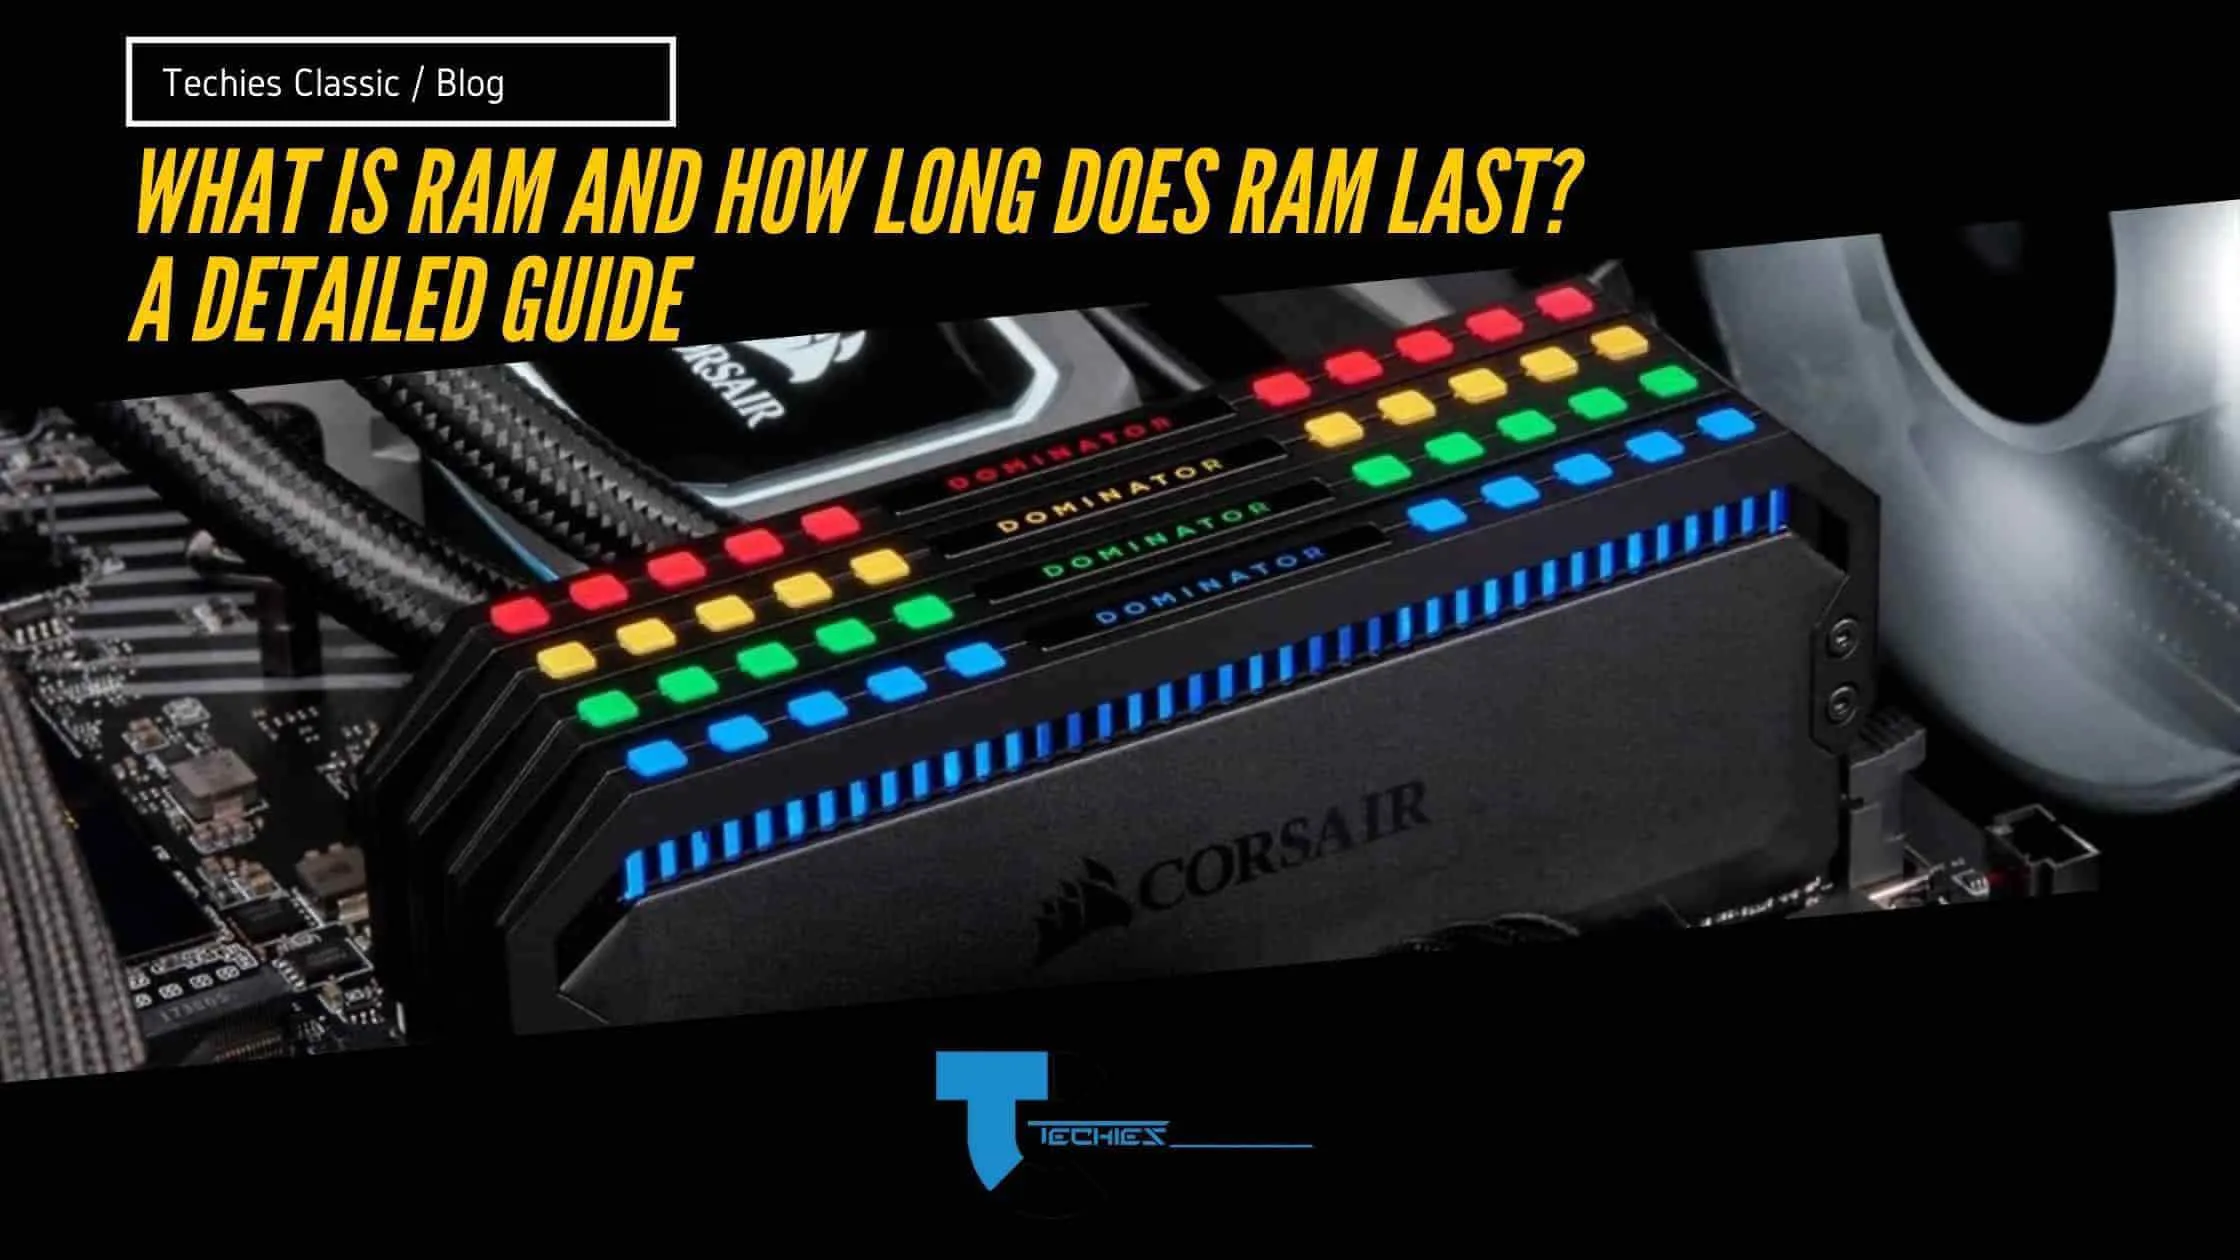 Techies Classic - is Ram and how long does ram last? A detailed guide